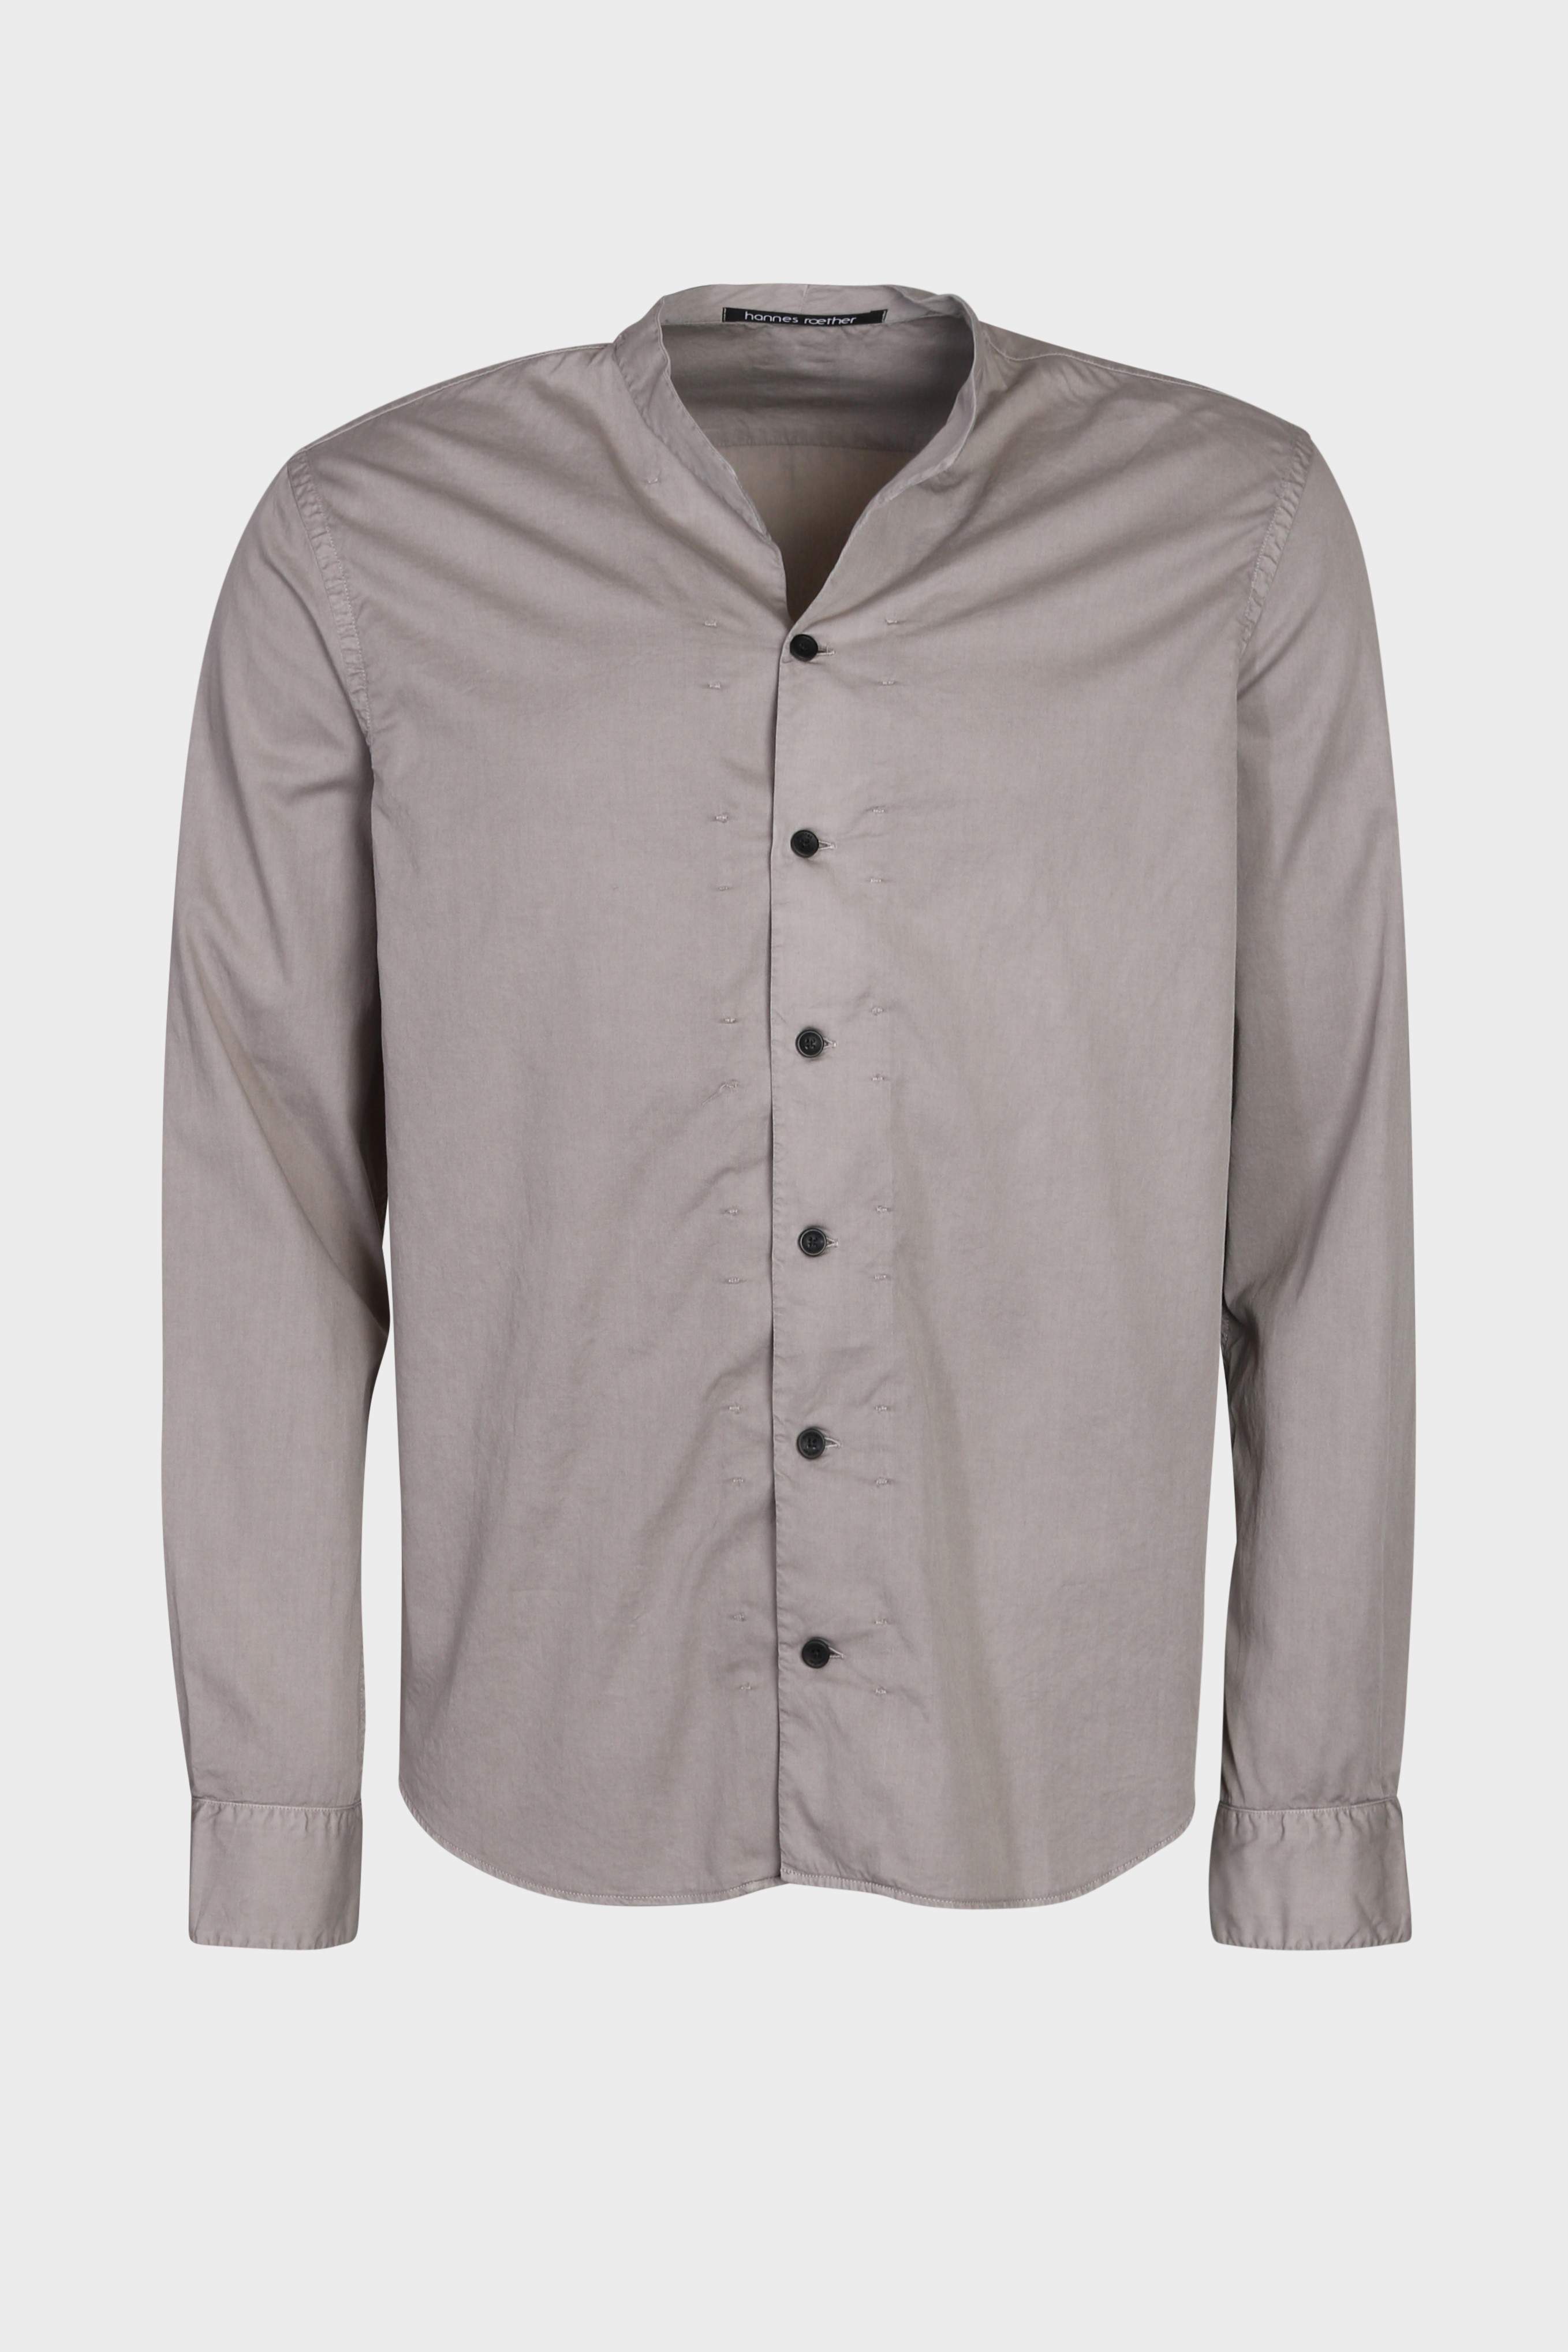 HANNES ROETHER Cotton Shirt in Taupe L